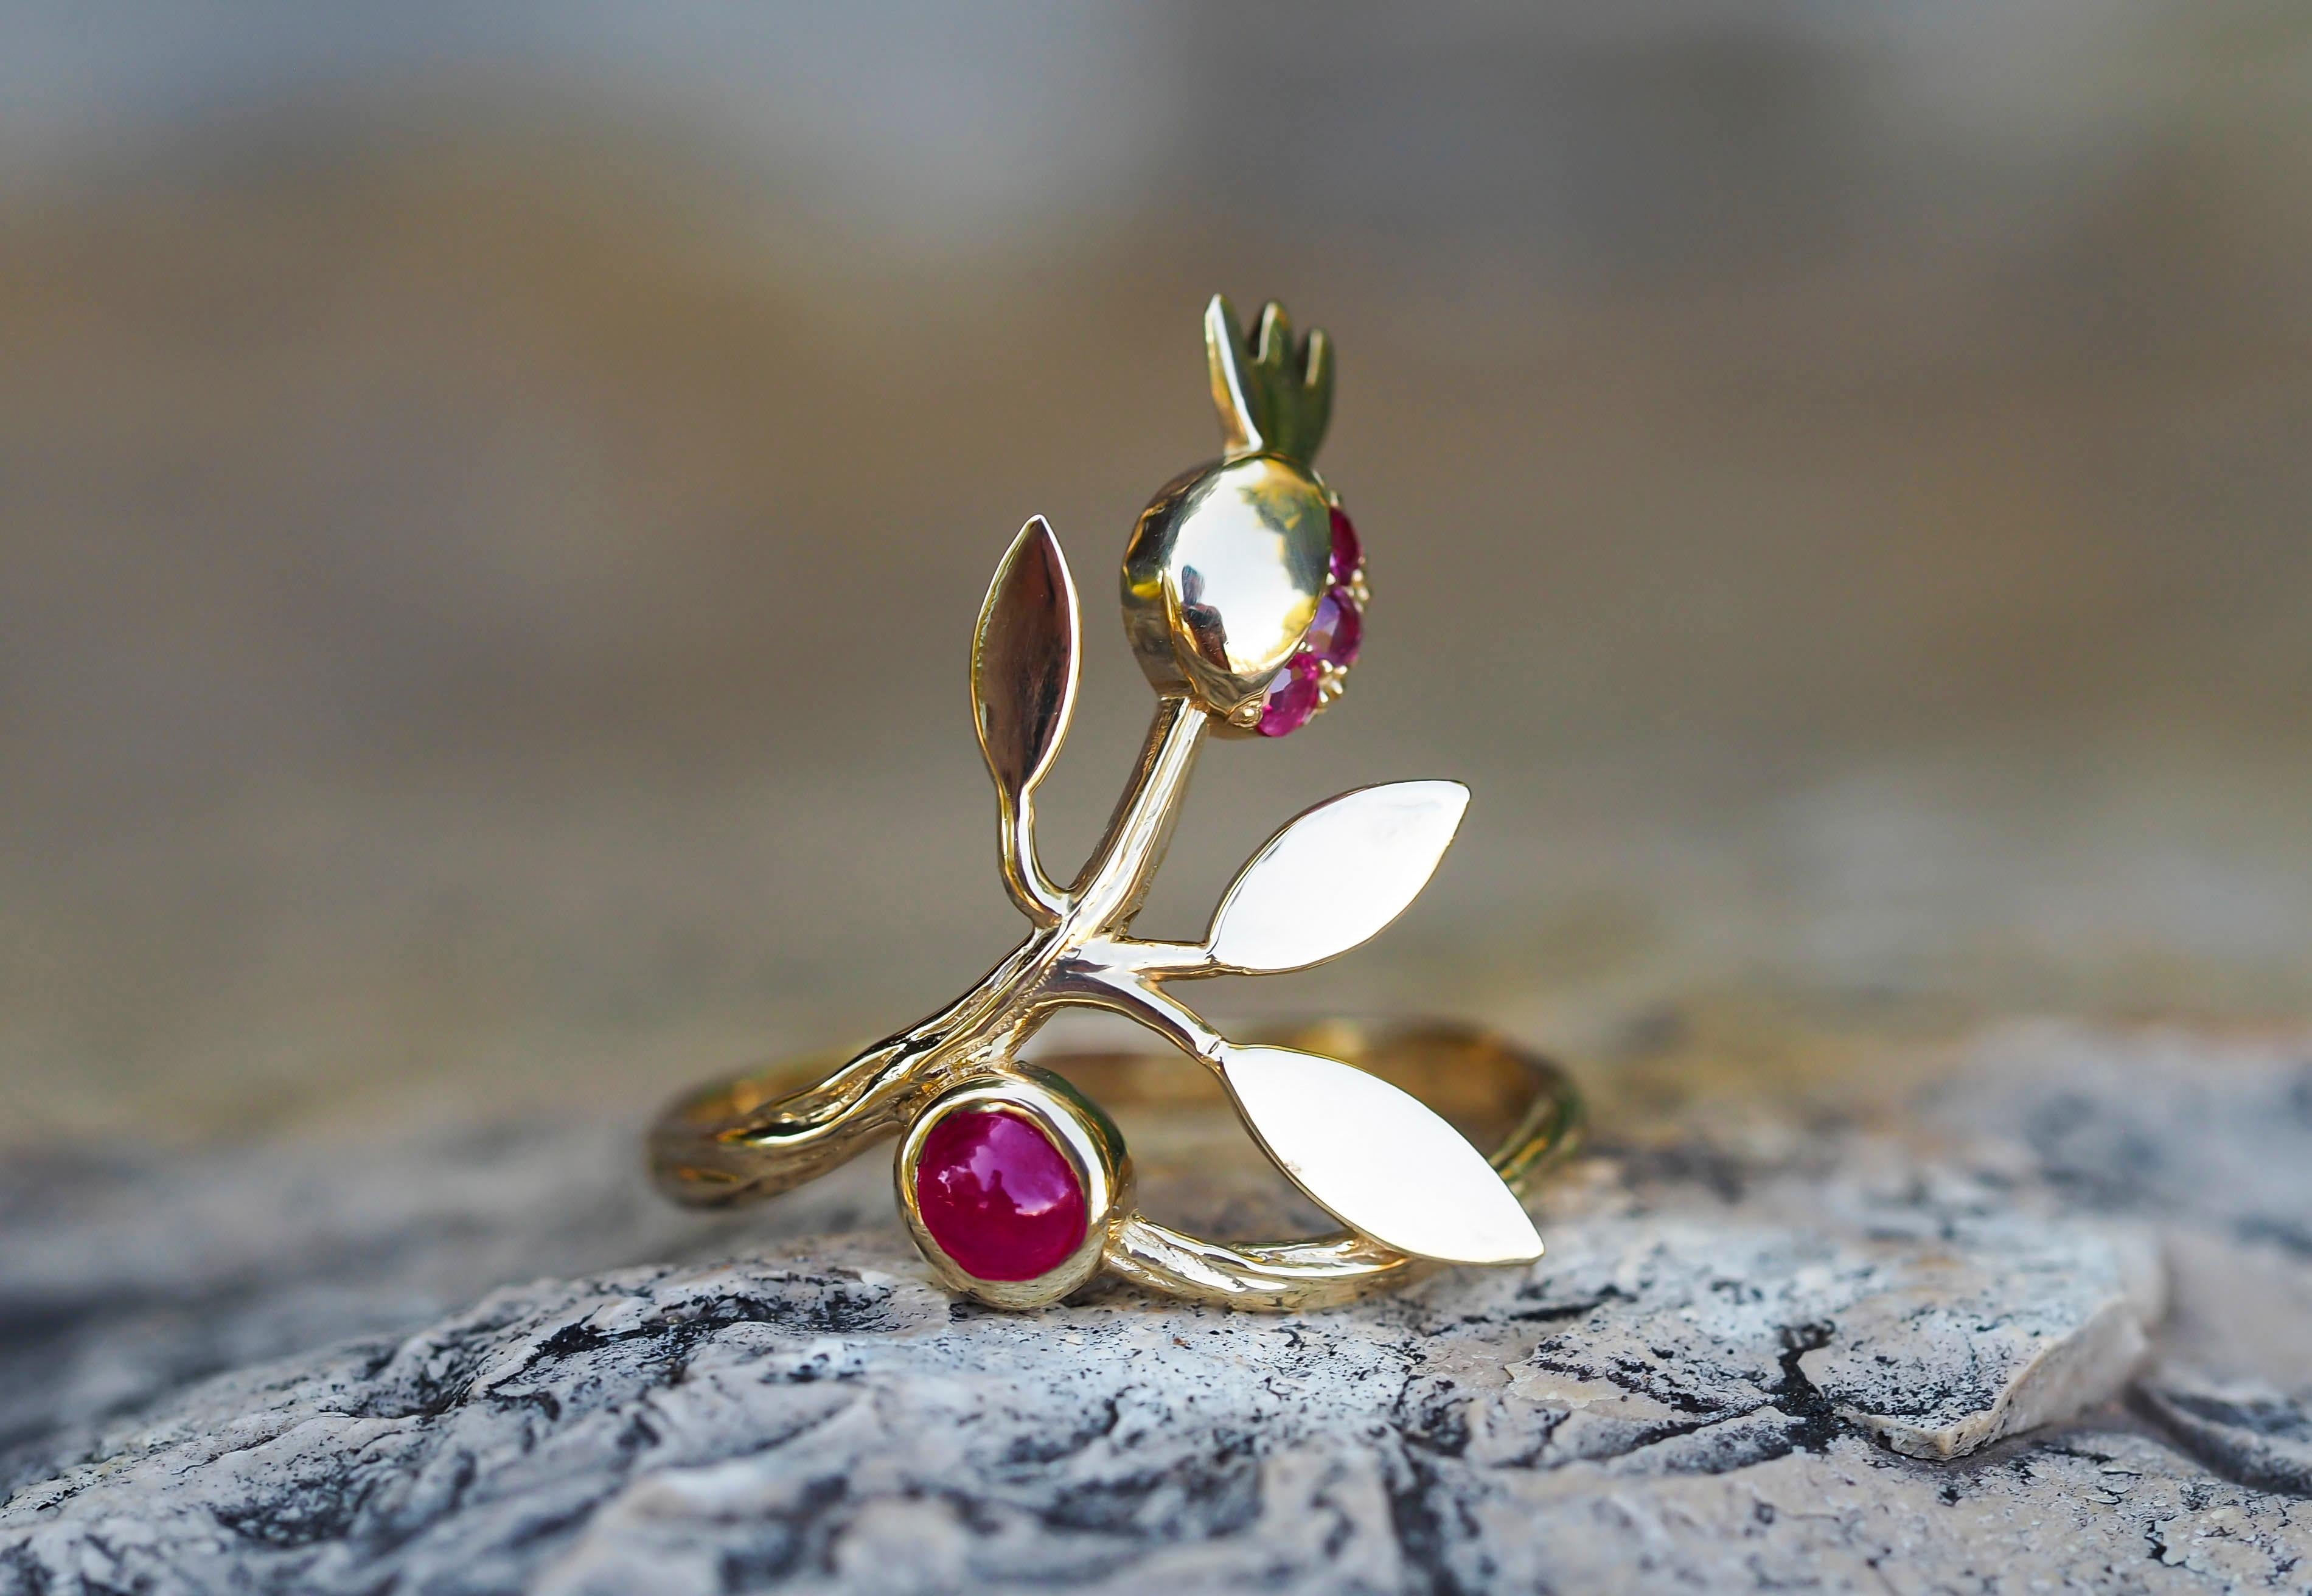 For Sale:  14 karat Gold Ring with Ruby, Sapphires. Pomegranate ring. July birthstone ring! 9